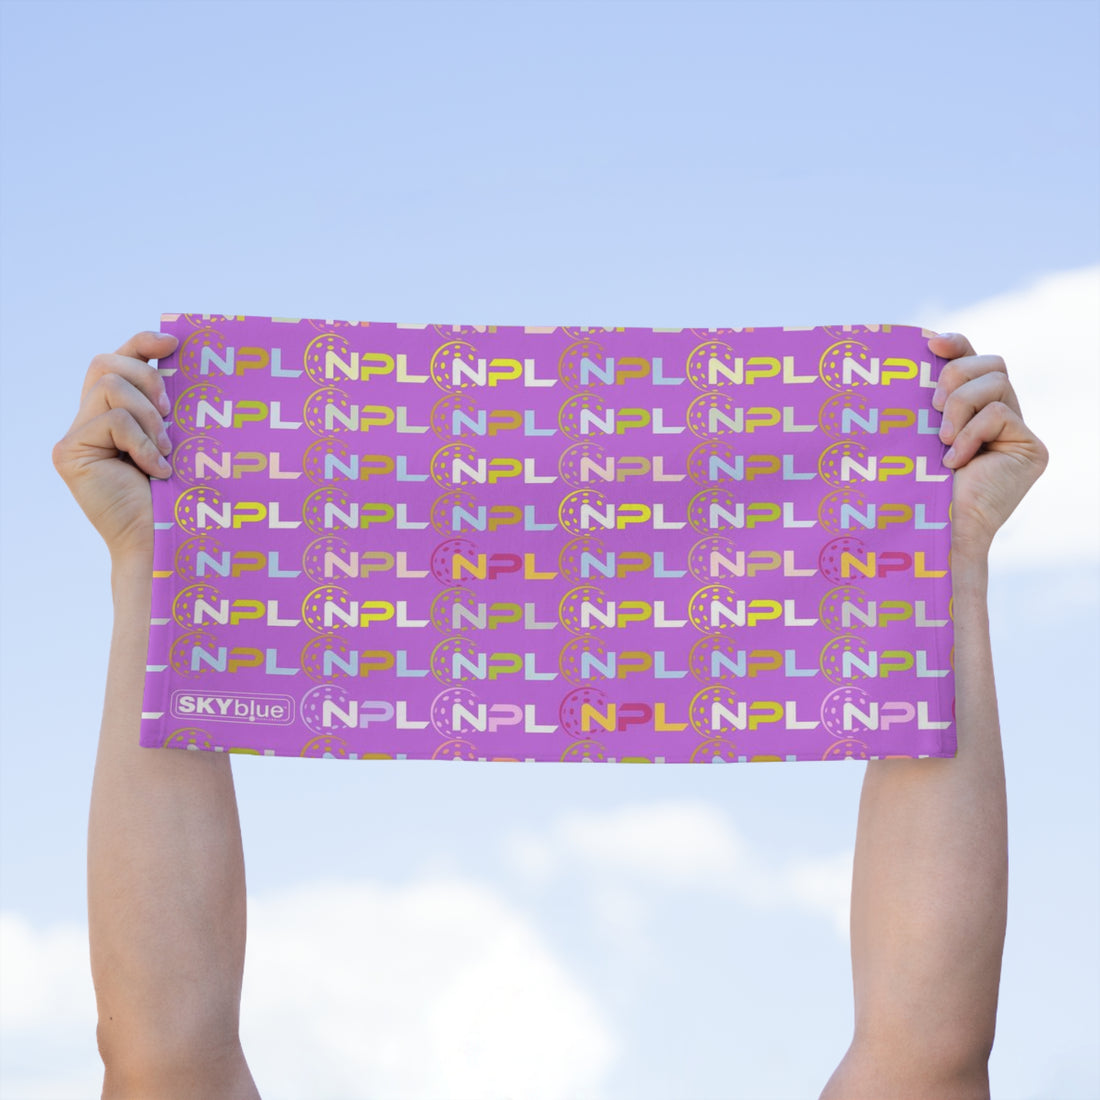 NPL™ Pop-Art Rally Towel - Add Some Color to Your Game! 11x18